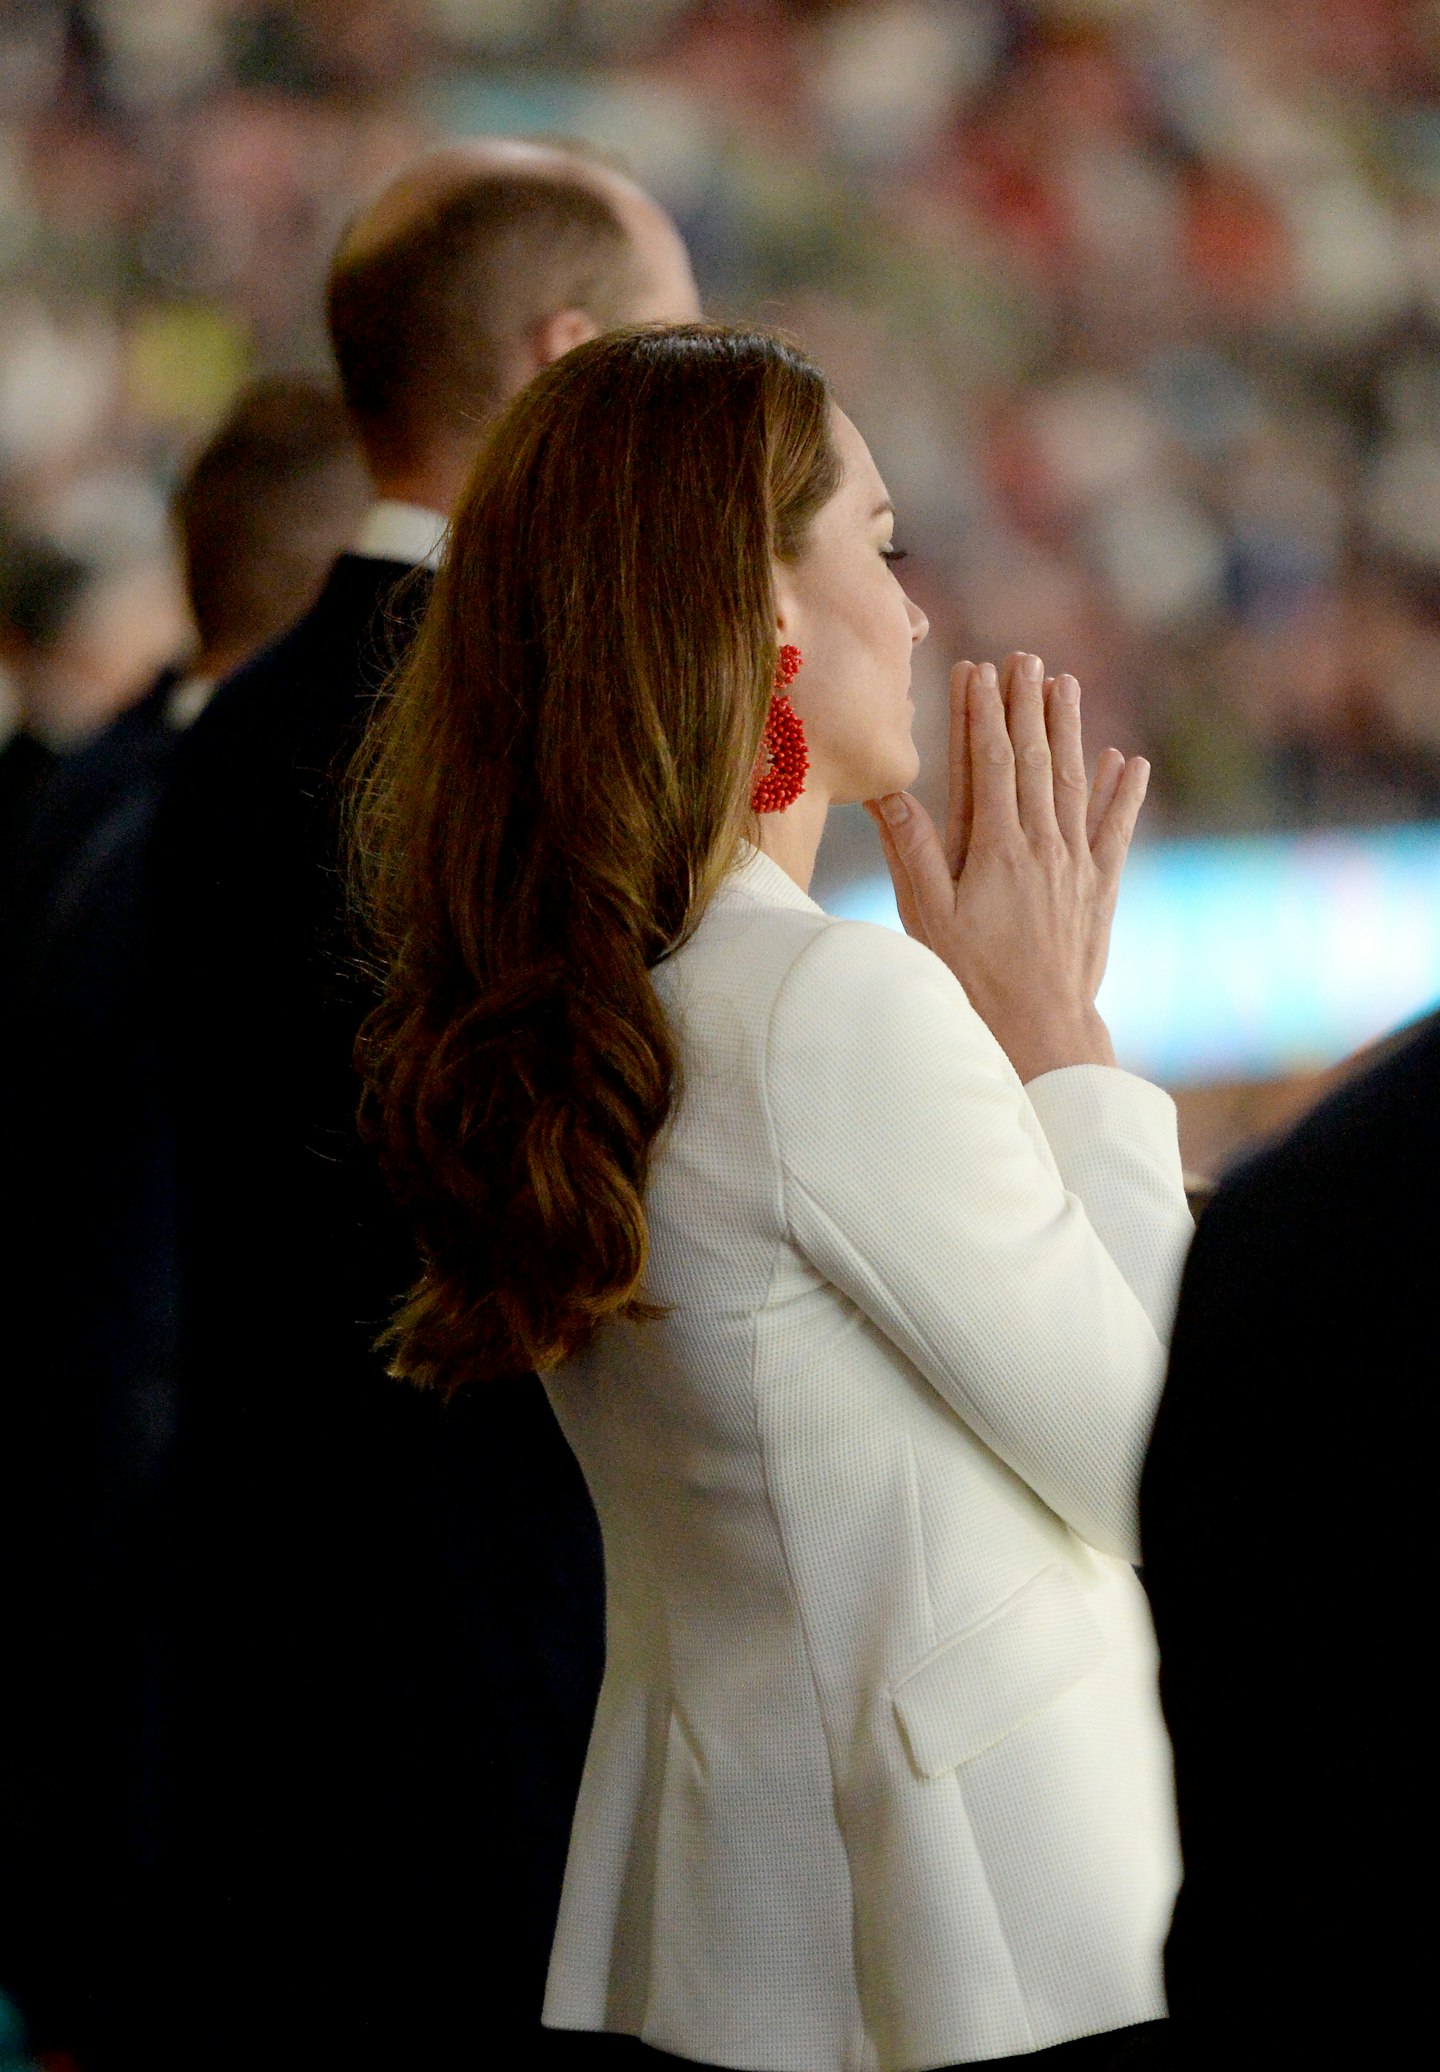 Kate Middleton watching the football final wearing red earrings and a white blazer 